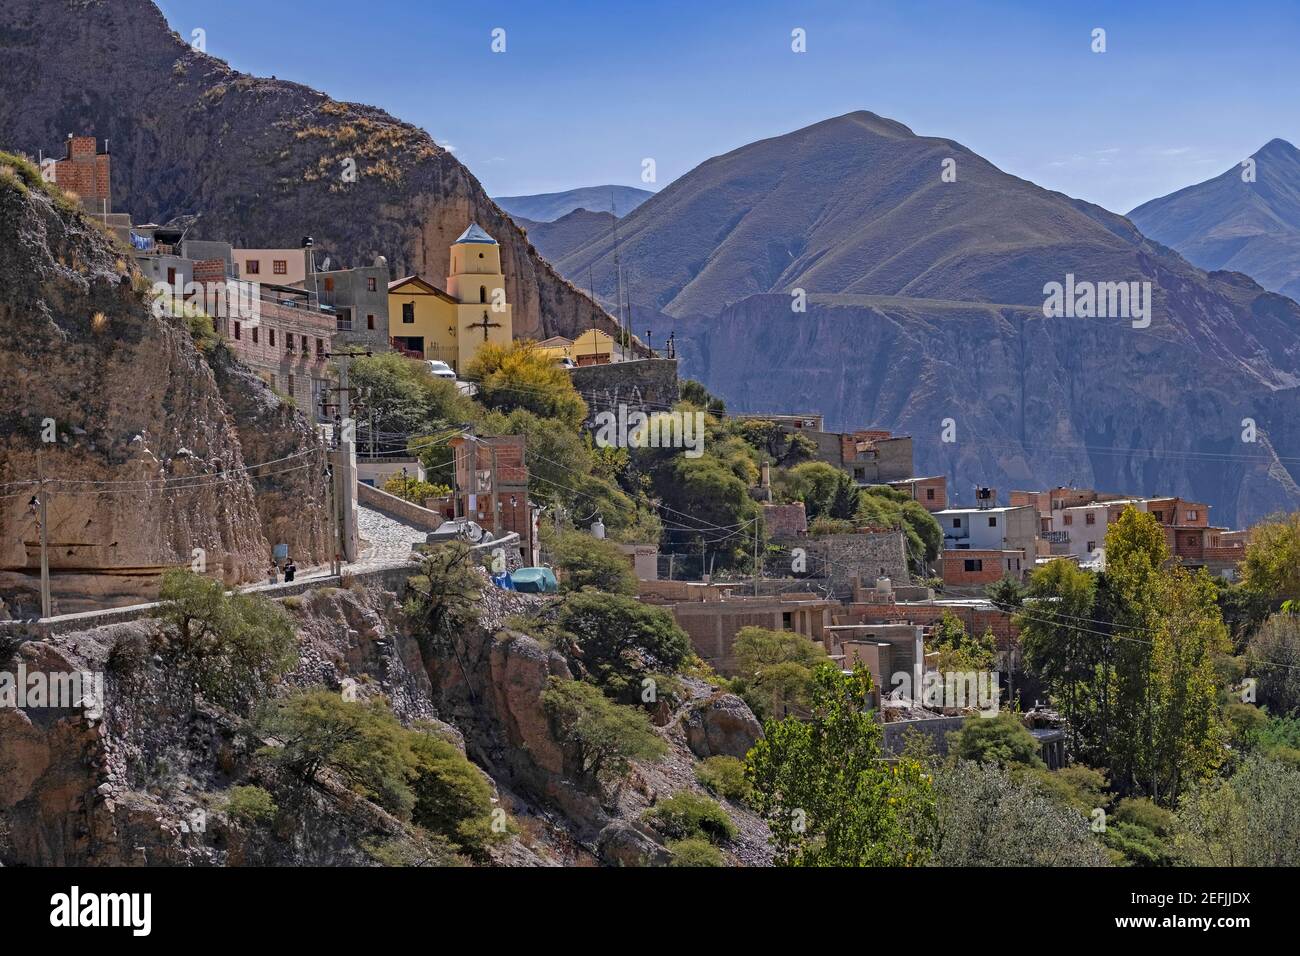 Village Iruya with its 17th century church, nestled against the mountainside in the Salta Province in northwestern Argentina Stock Photo